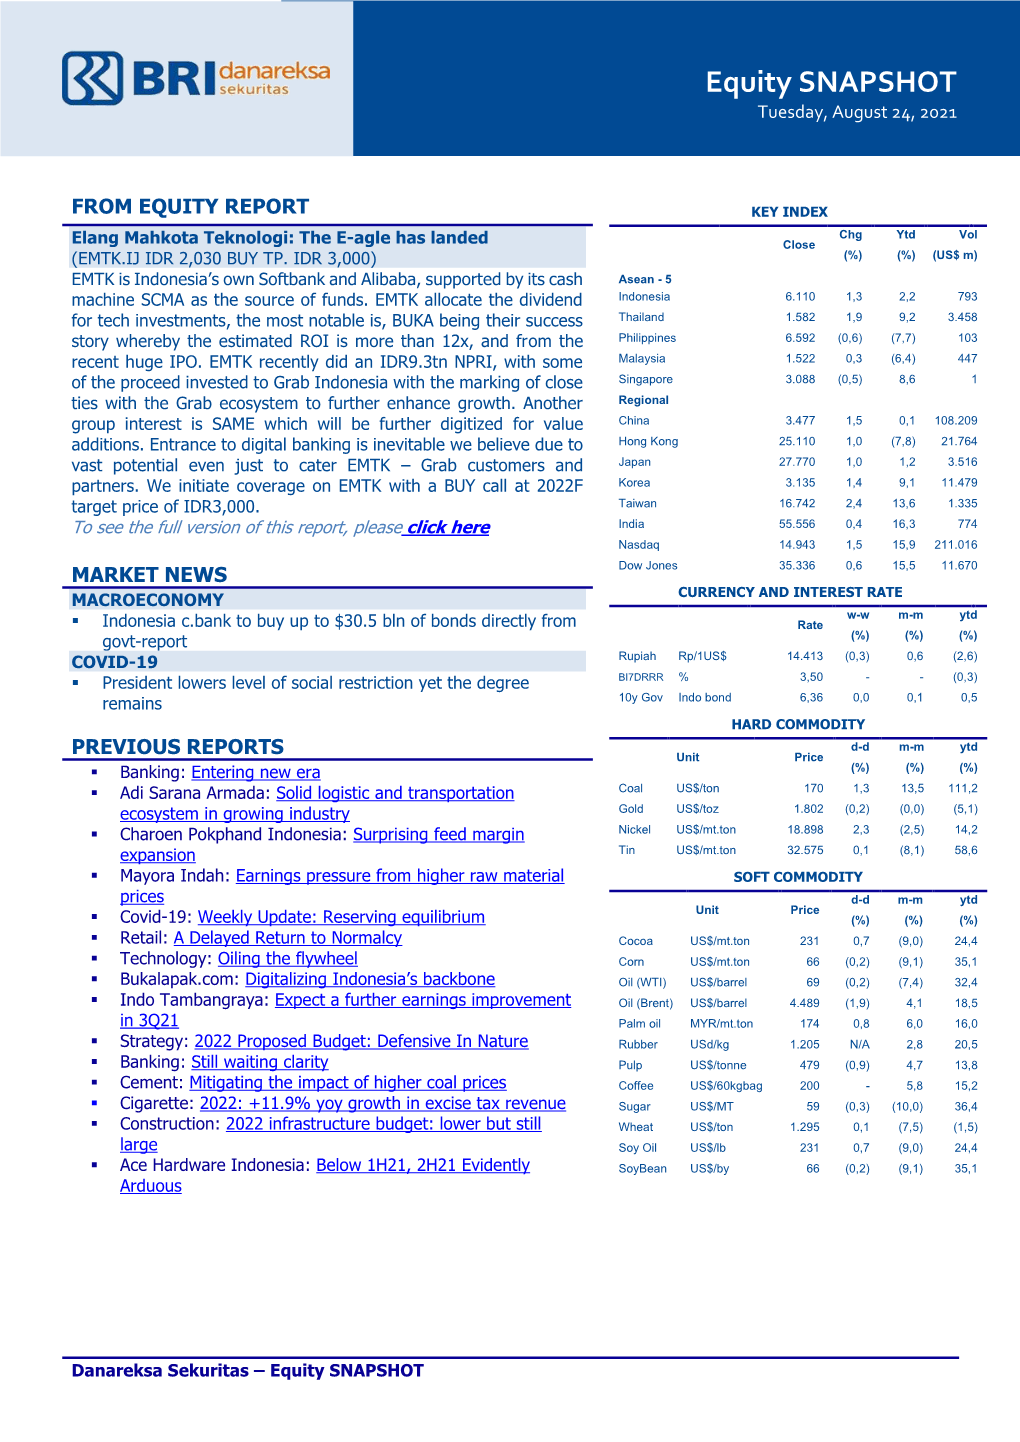 Equity SNAPSHOT Tuesday, August 24, 2021